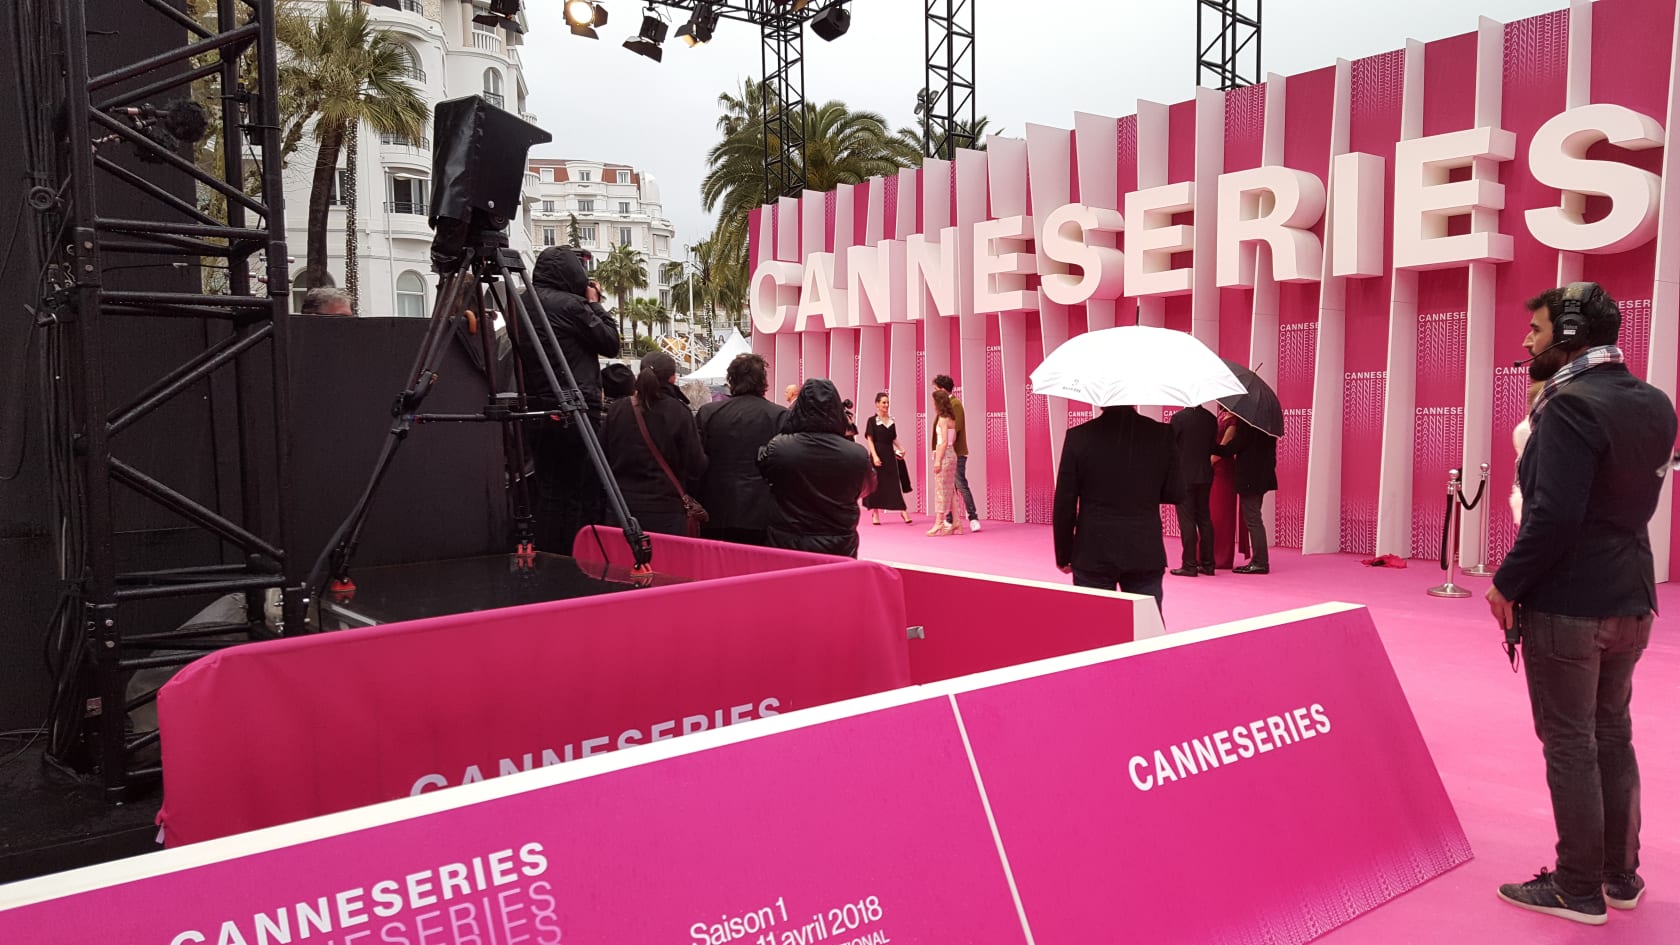 A photo sign spot at the Canneseries.